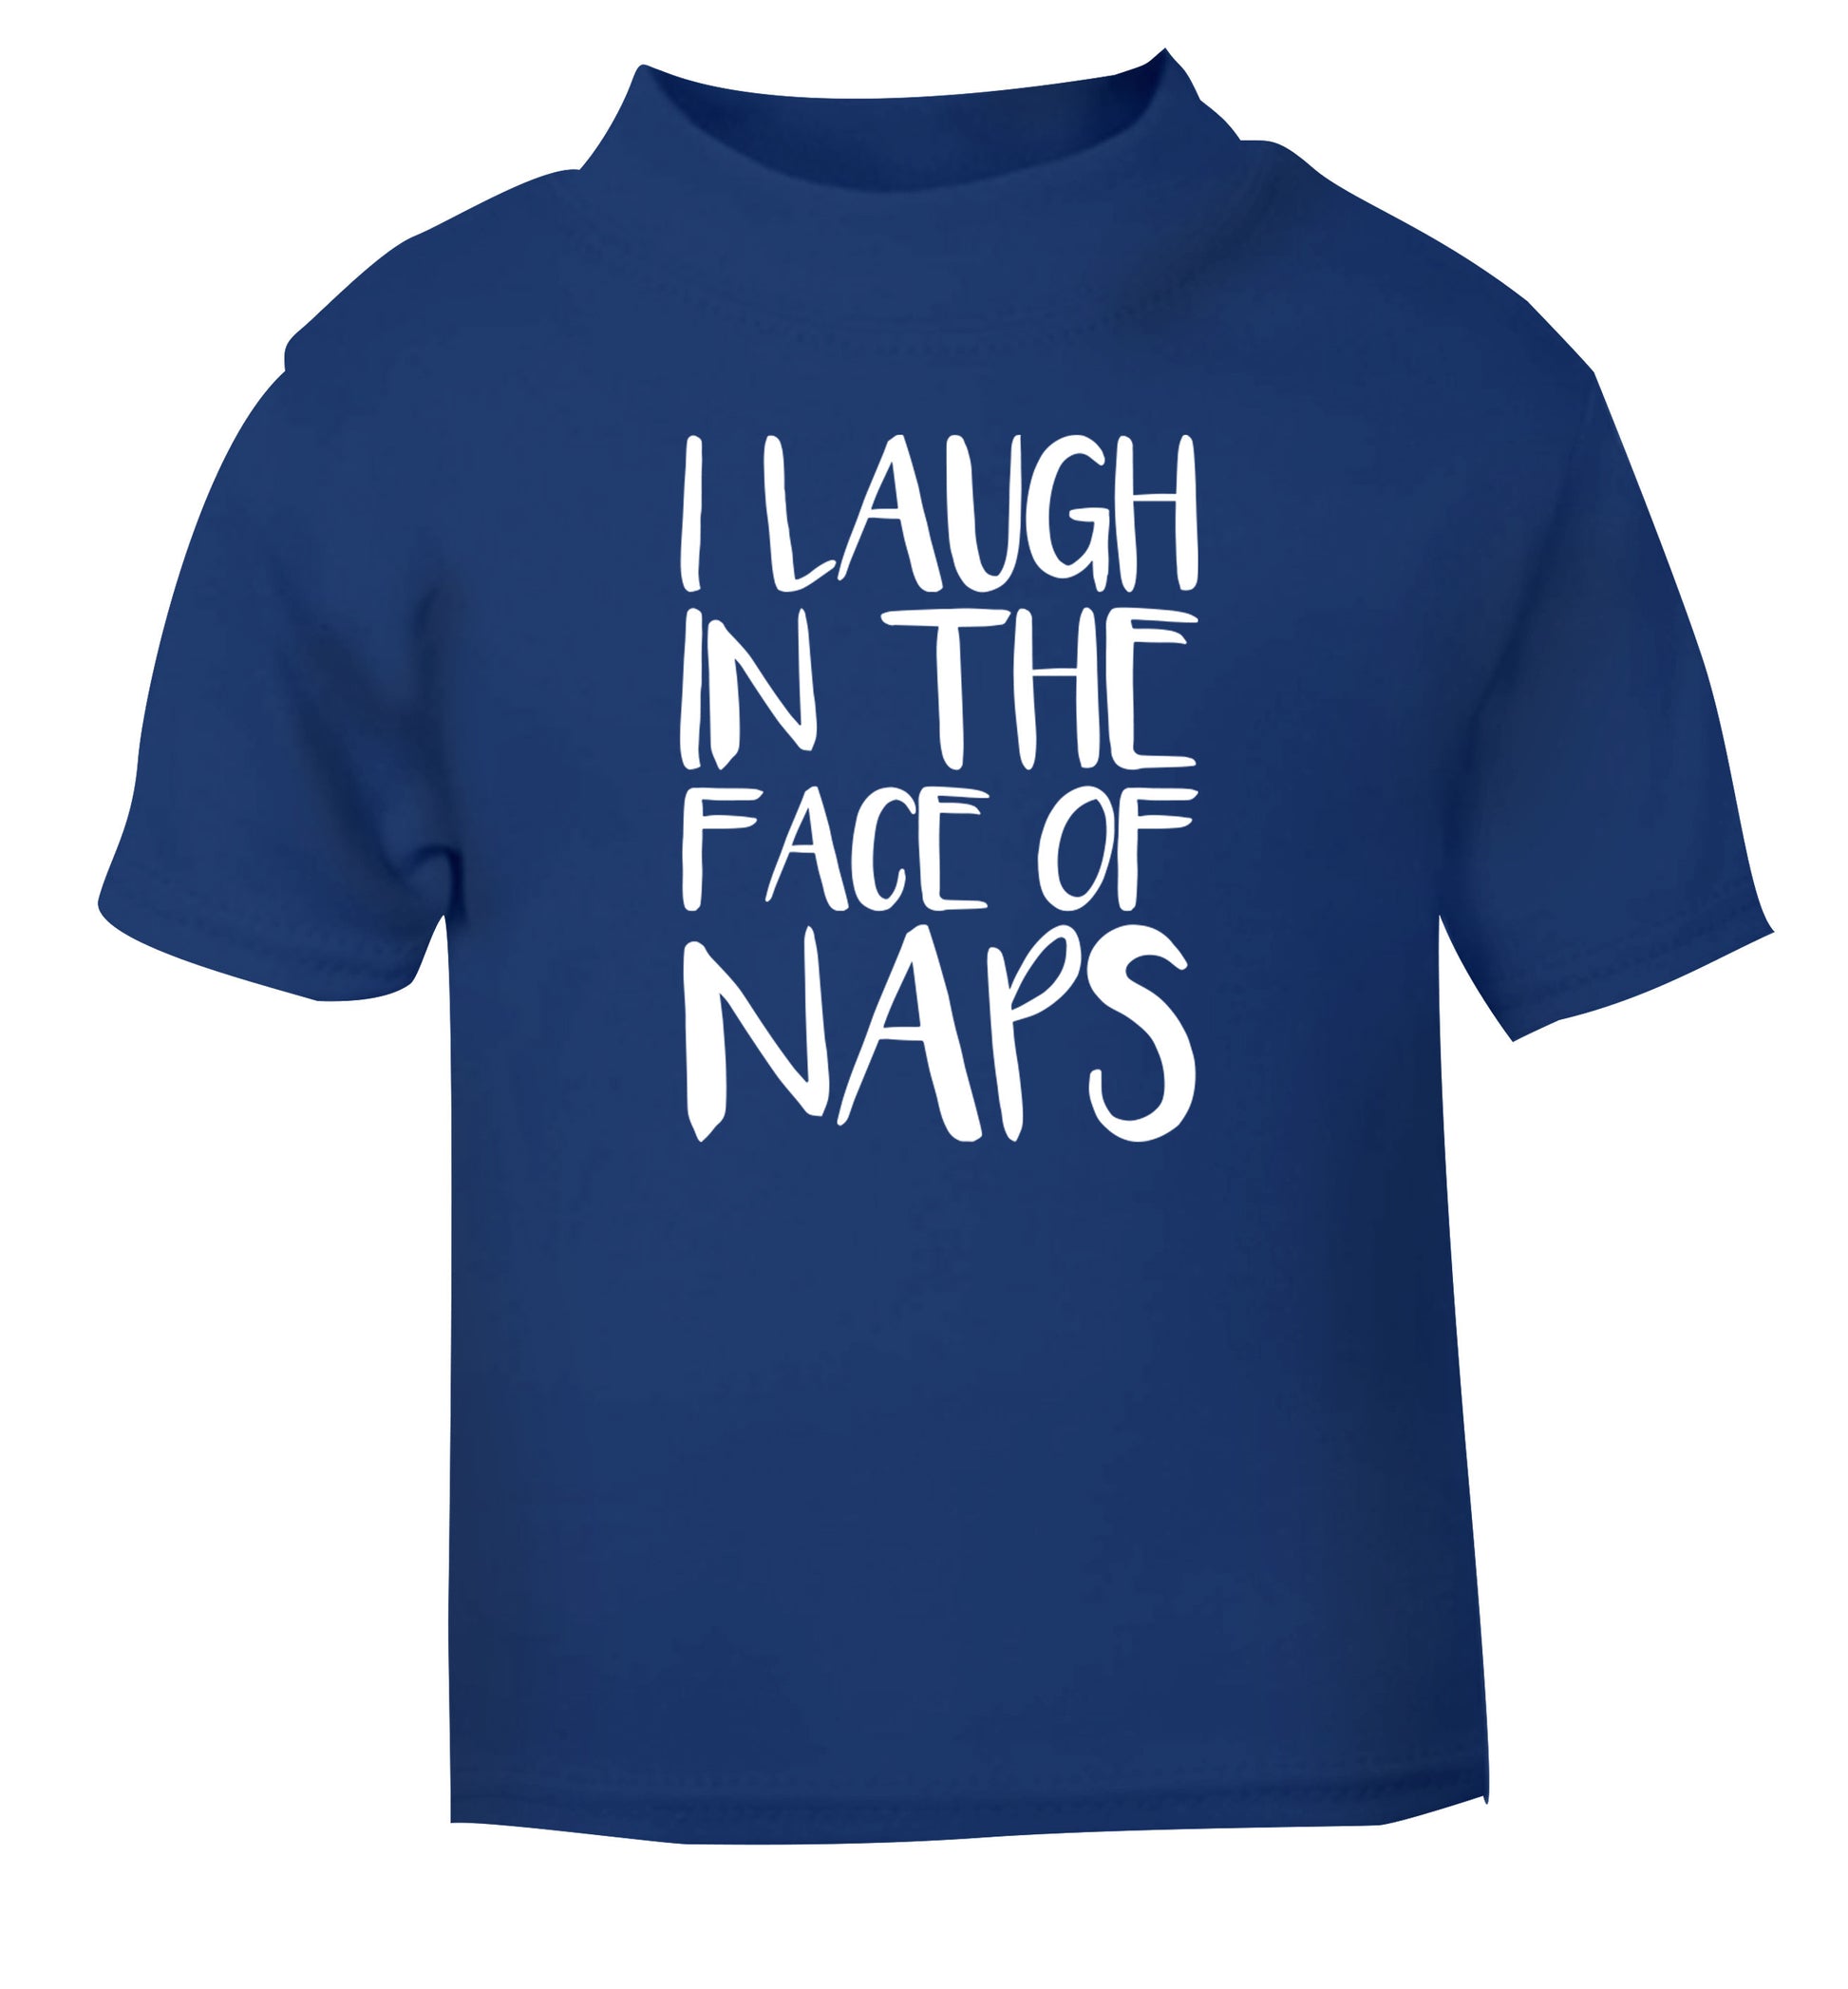 I laugh in the face of naps blue Baby Toddler Tshirt 2 Years